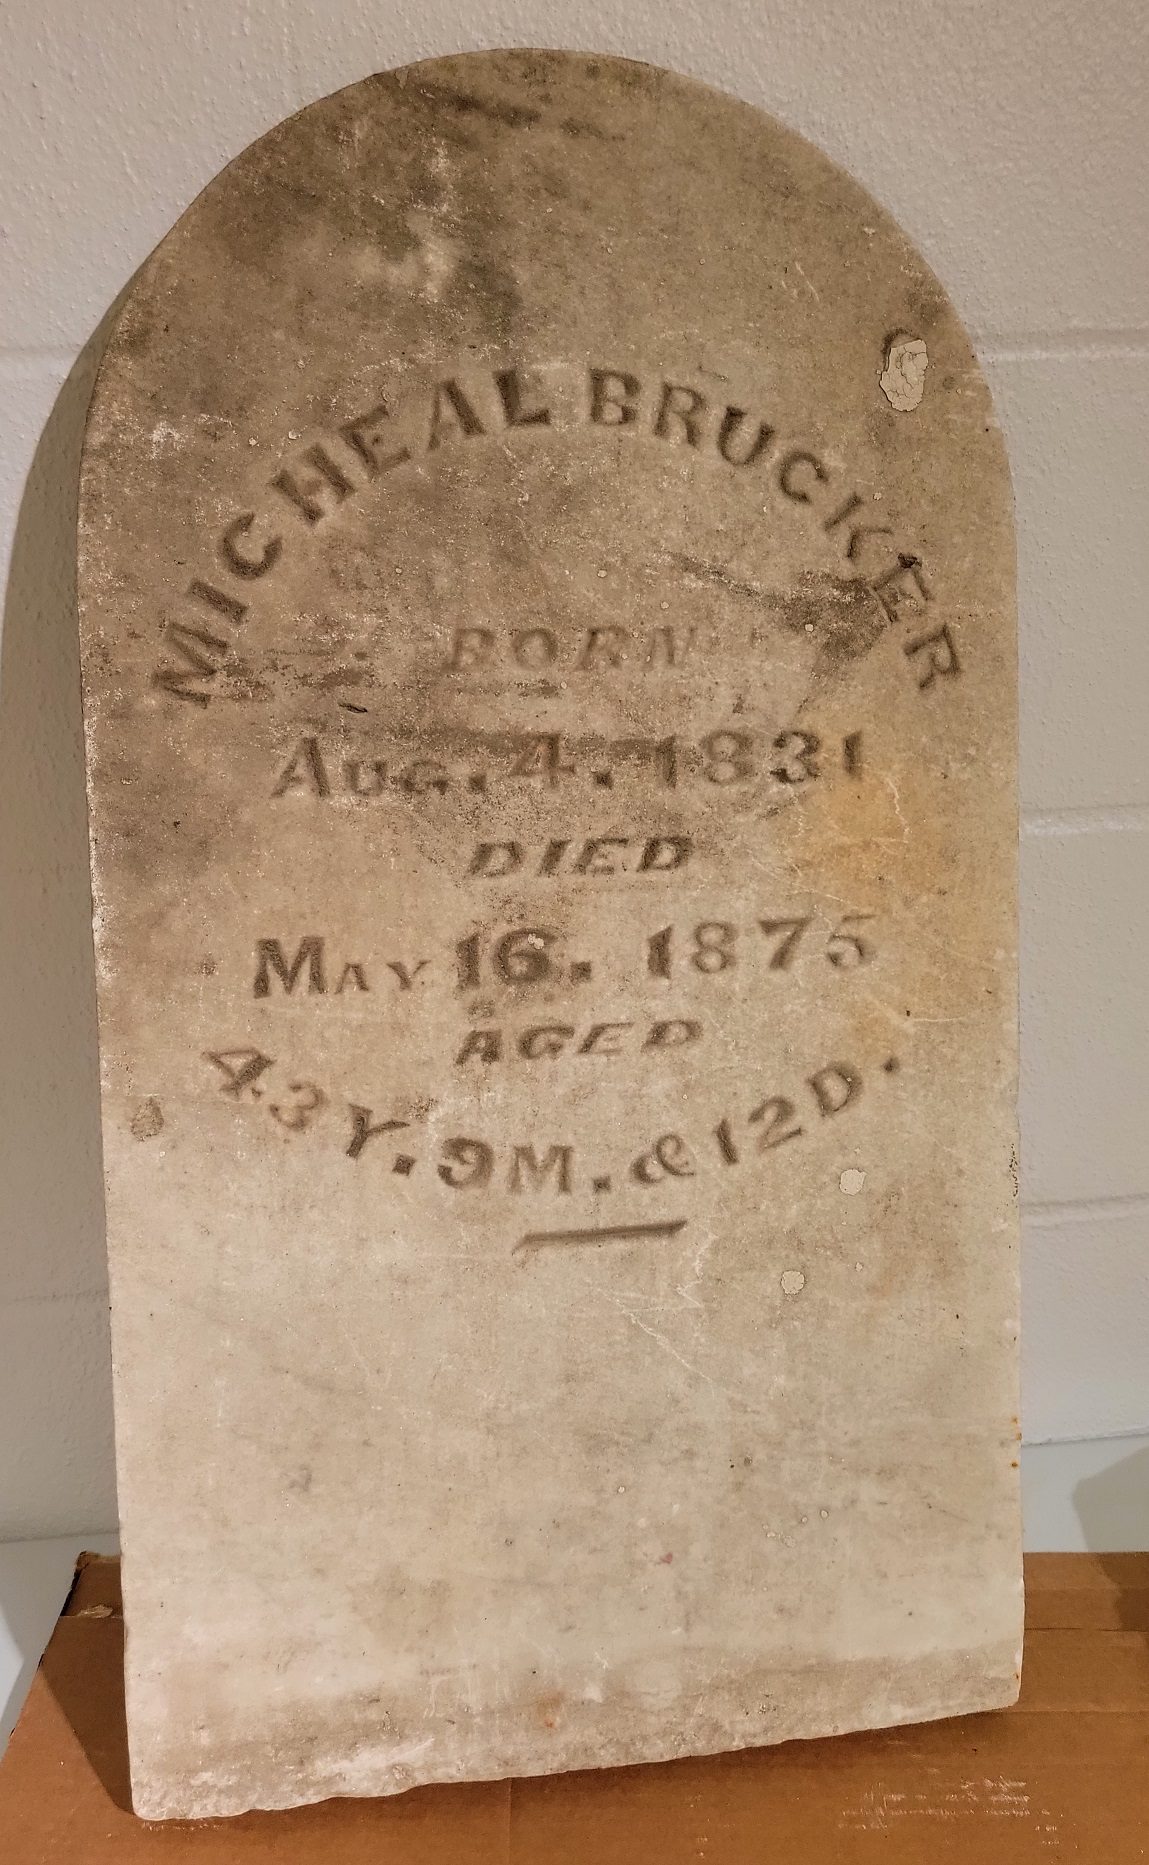 Micheal Brucker (1831-1875) gravestone, currently in possession of the Ohio History Connection. Note the spelling of “Micheal” instead of the more common “Michael”. Both spellings are used in historic research but we will refer to him as “Micheal” in this article.